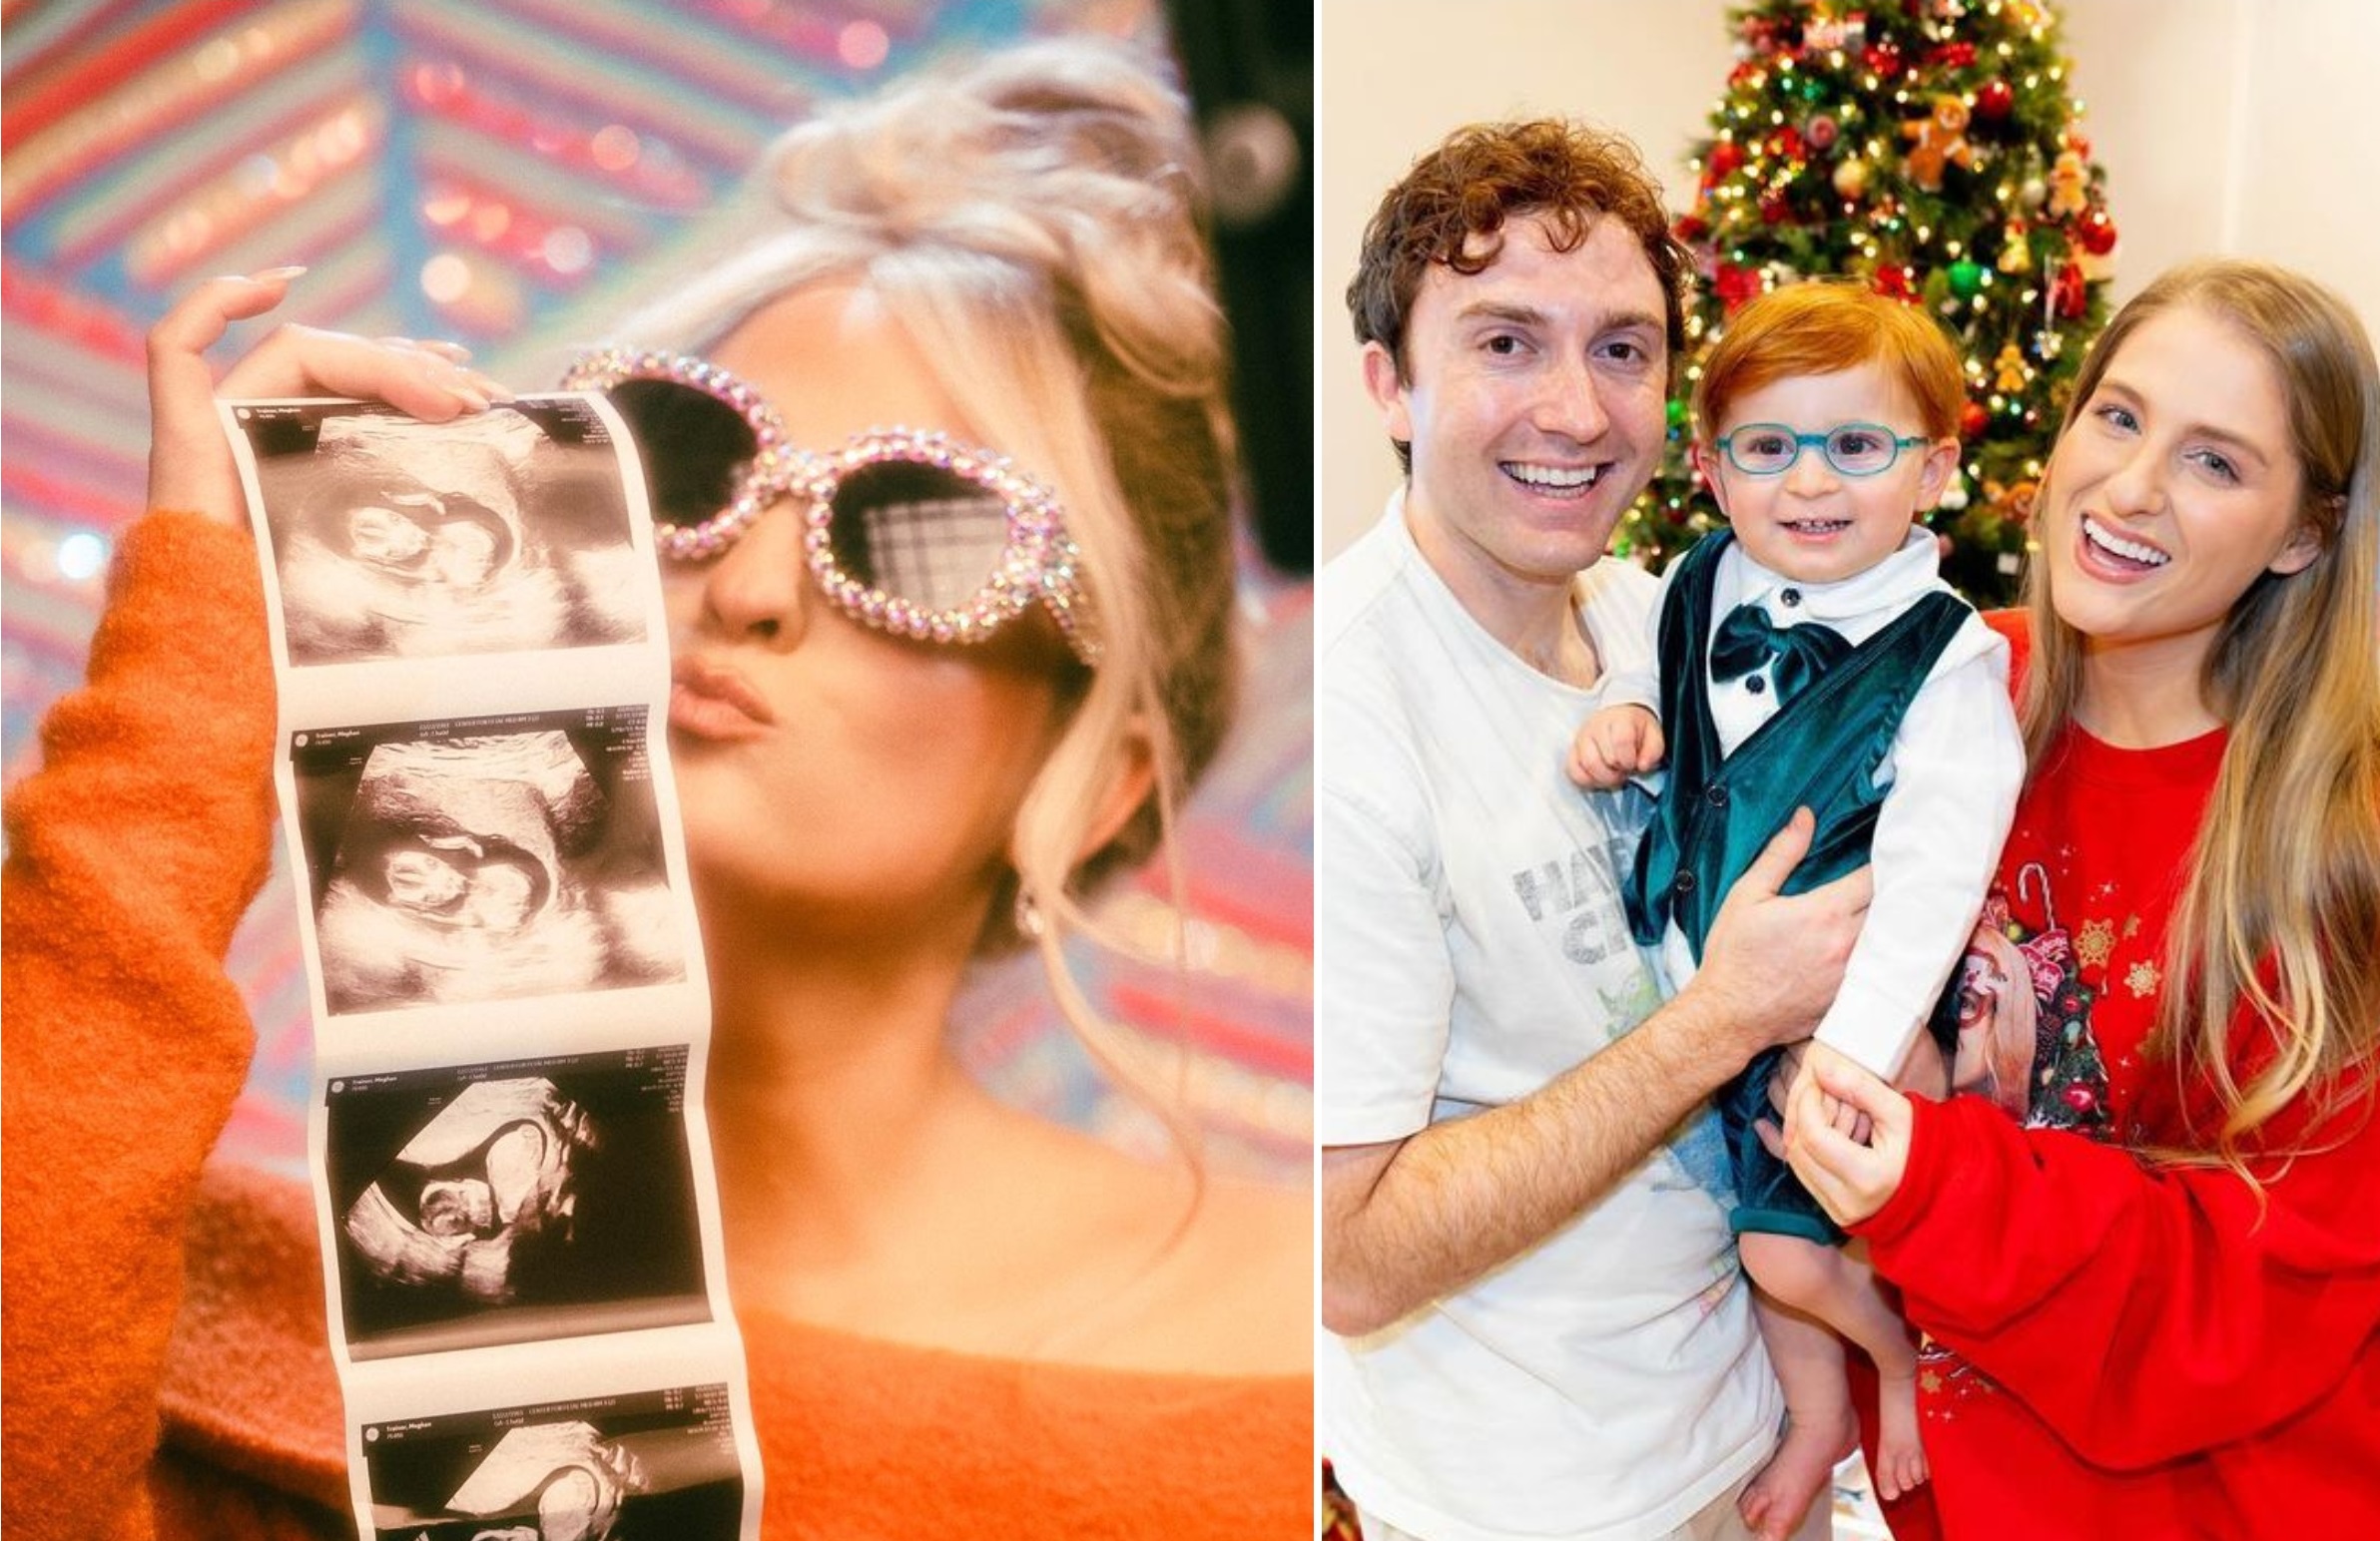 Meghan Trainor Dropped Pregnancy Clues Before Second Baby Announcement